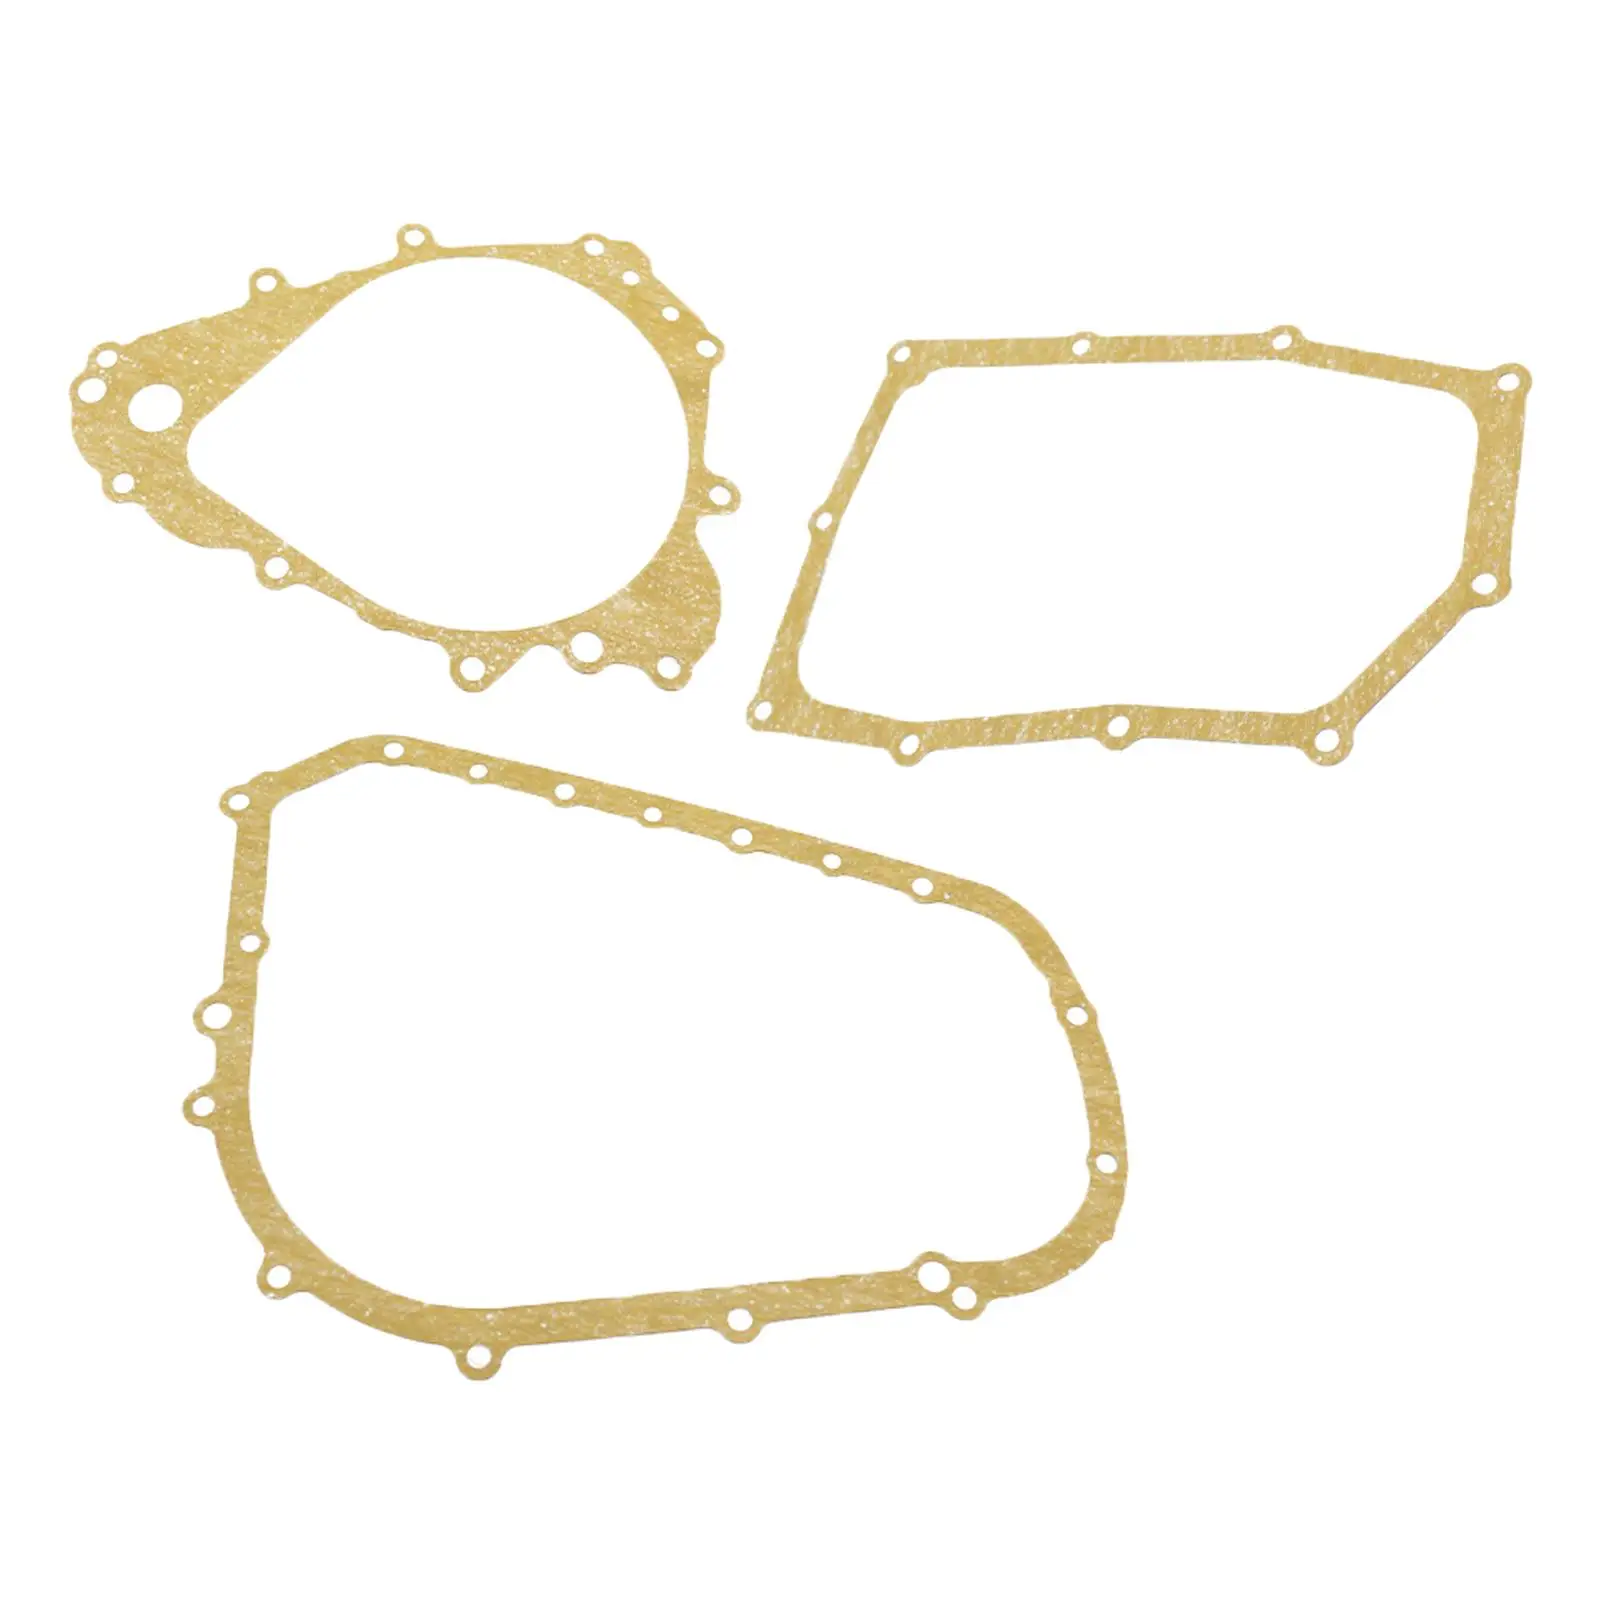 Oil Pan Clutch  Cover Gasket, Direct Replaces, Spare Parts, for    2012-2018, Durable ,Accessories